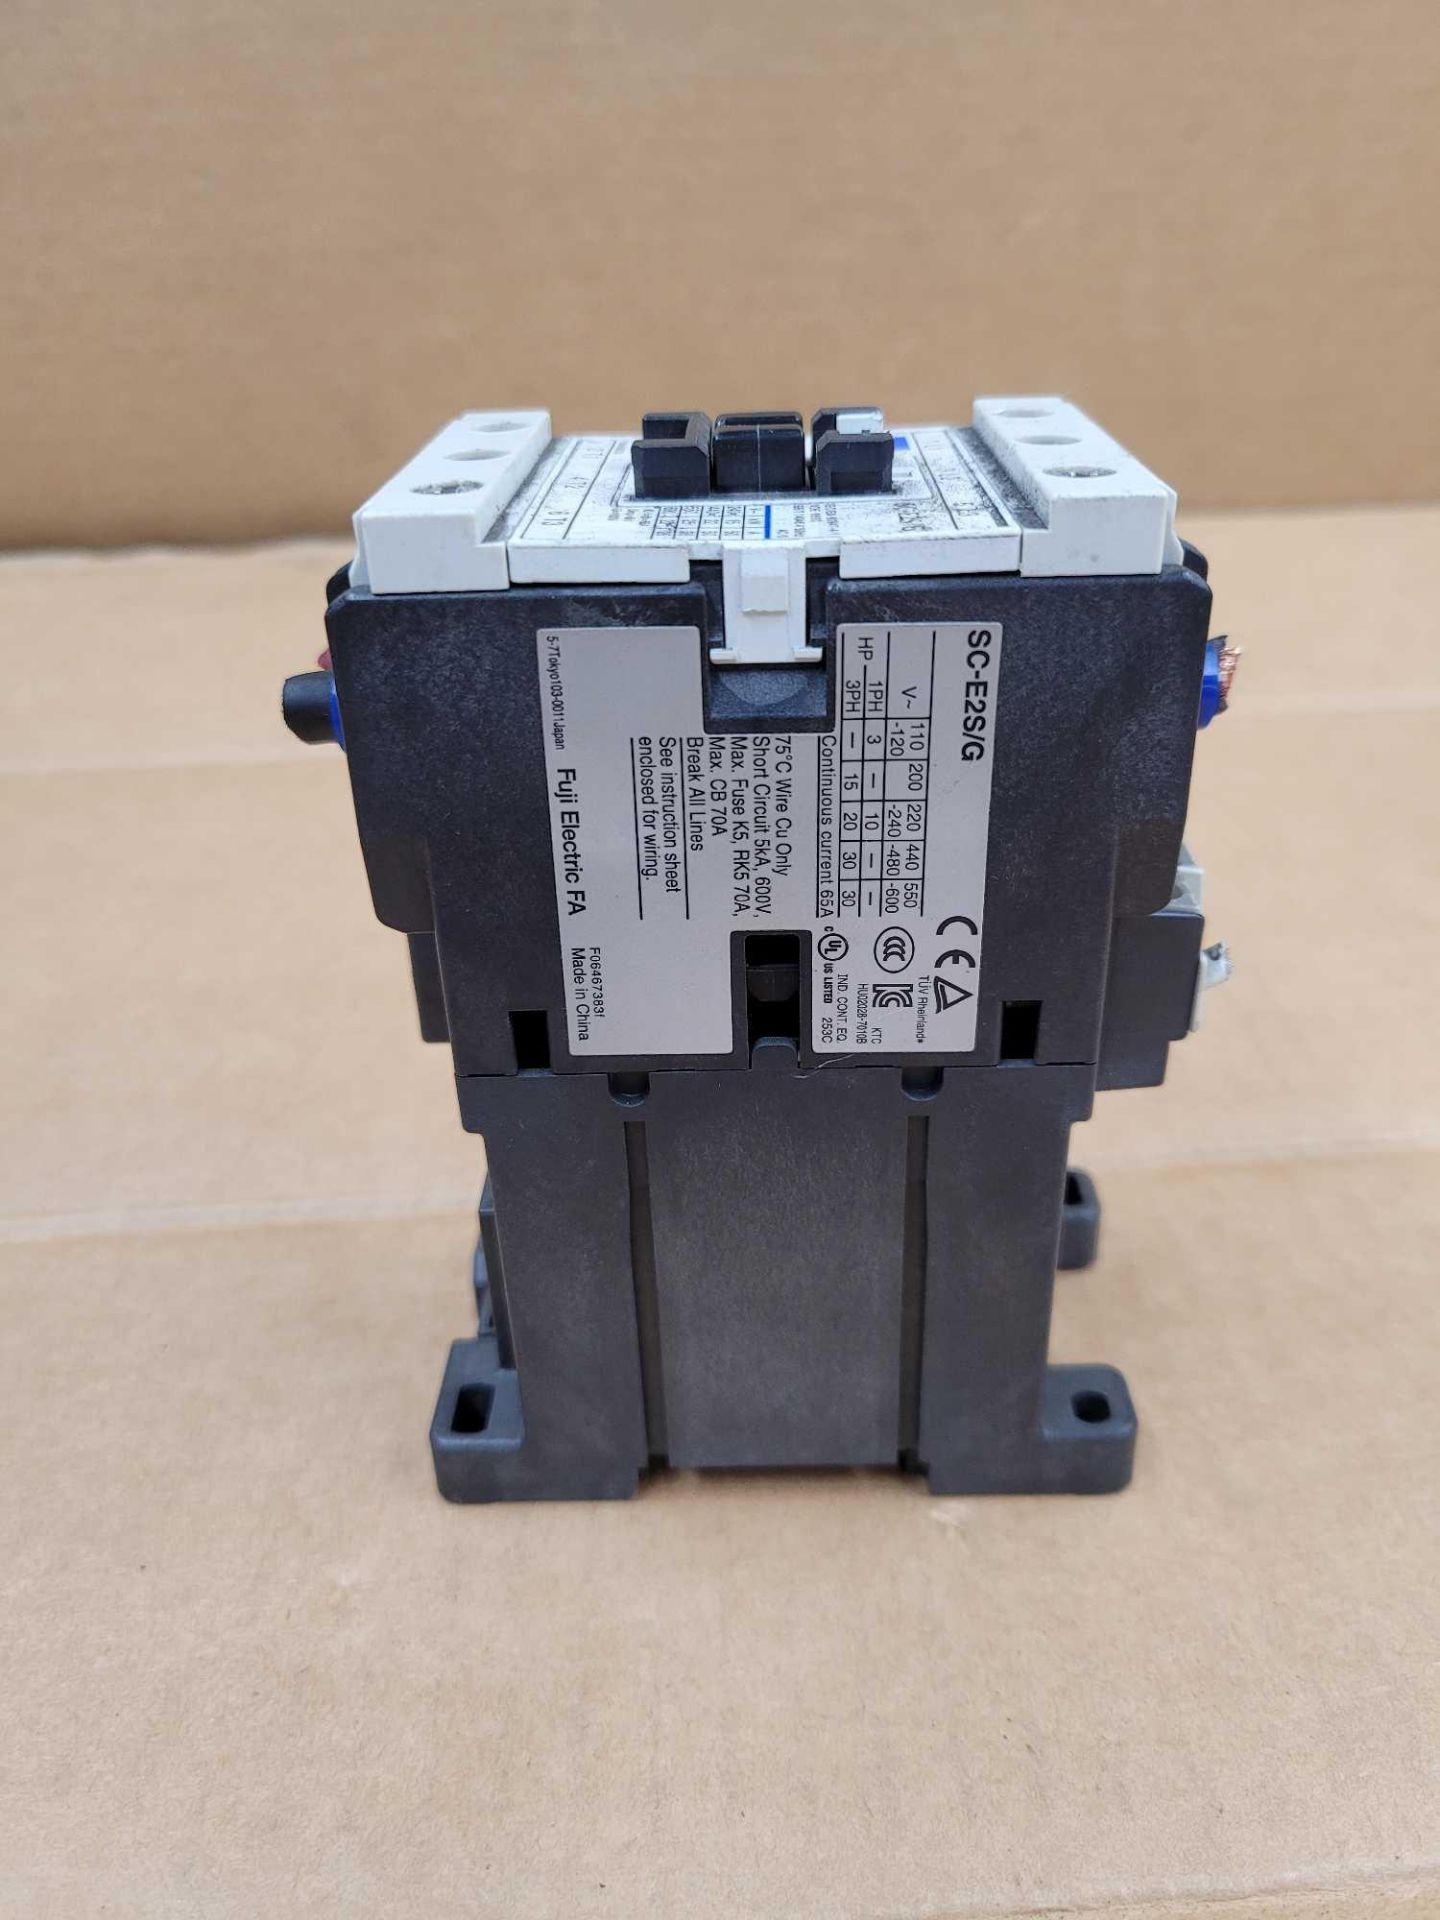 LOT OF 5 FUJI SC-E2S/G  /  Contactor  /  Lot Weight: 9.2 lbs - Image 4 of 9